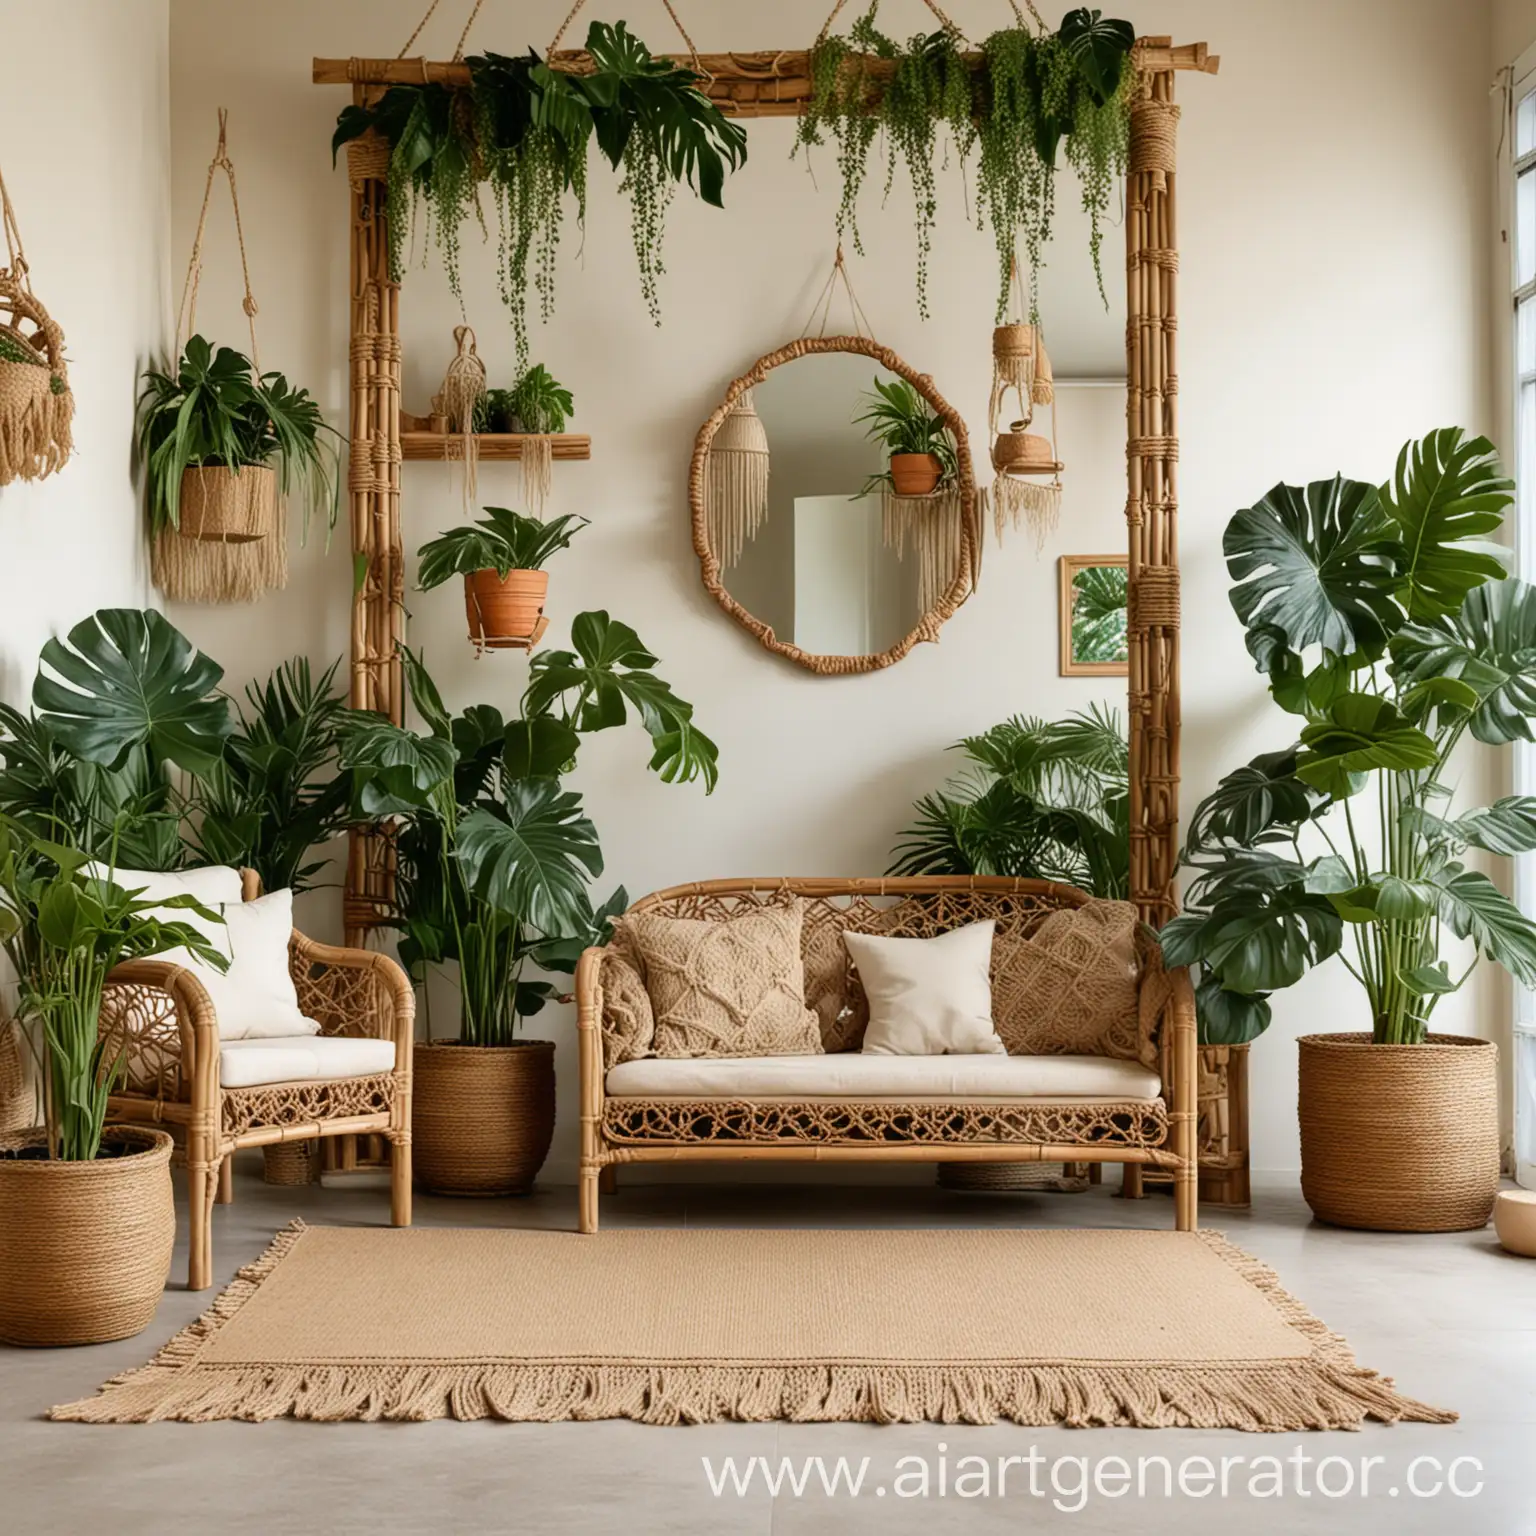 Tropical-Interior-Design-with-Woven-Furniture-and-Macrame-Decor